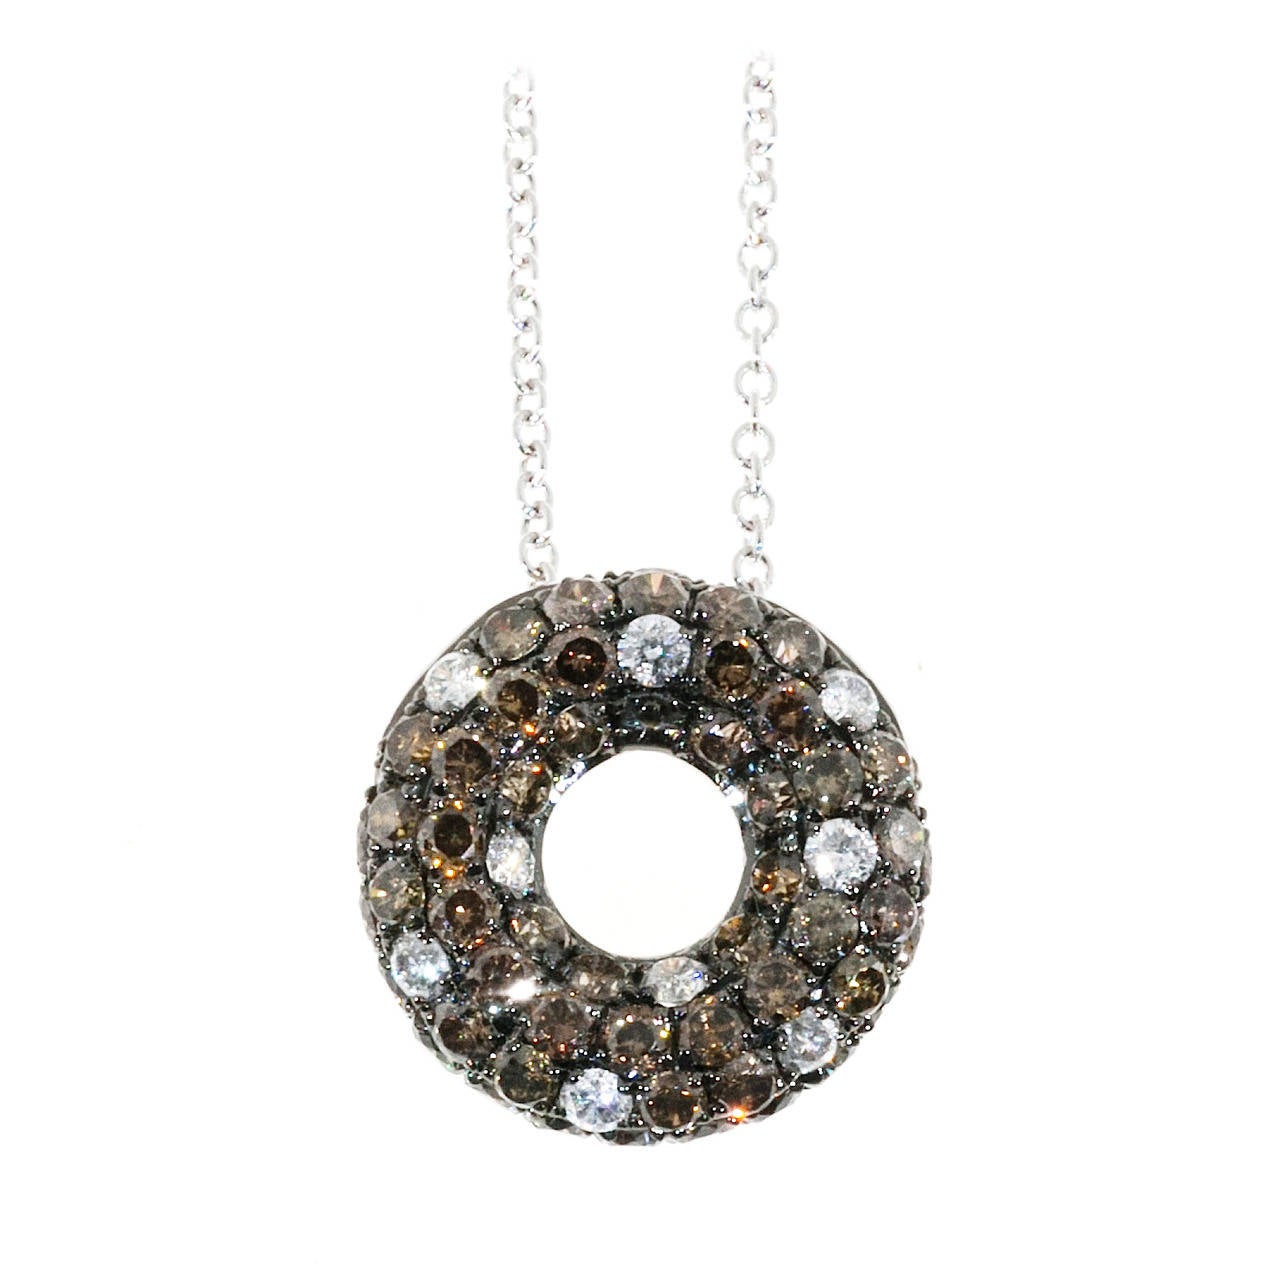 Dilimani 3-D Donut Shape Pave Chocolate and White Diamond Gold Pendant